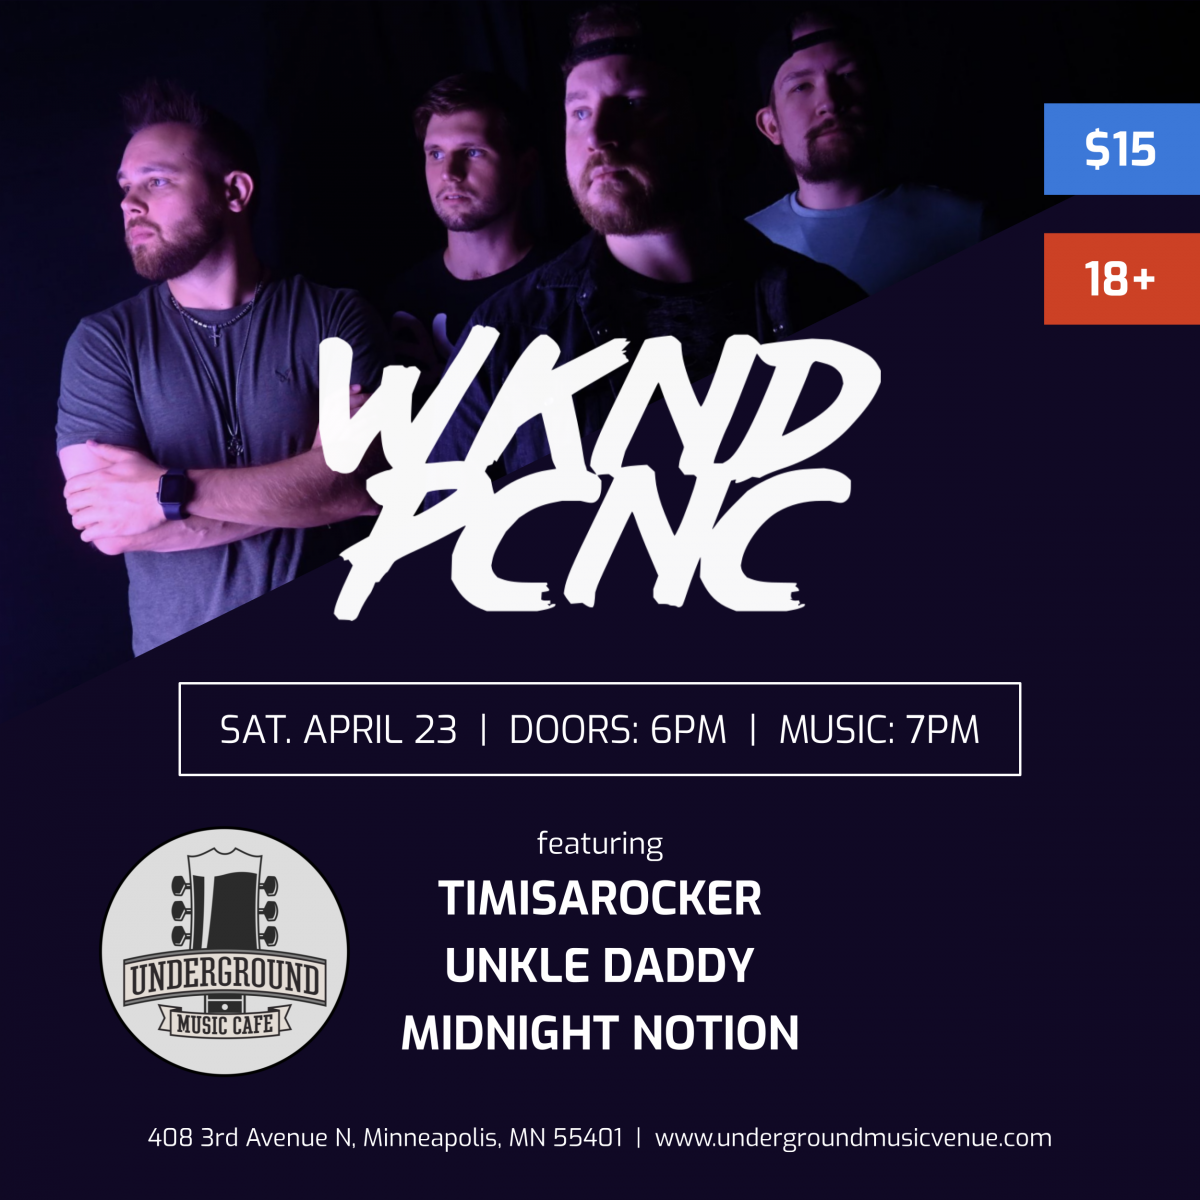 Weekend Picnic Live Debut, feat. Midnight Notion, Unkle Daddy, and Timisarocker